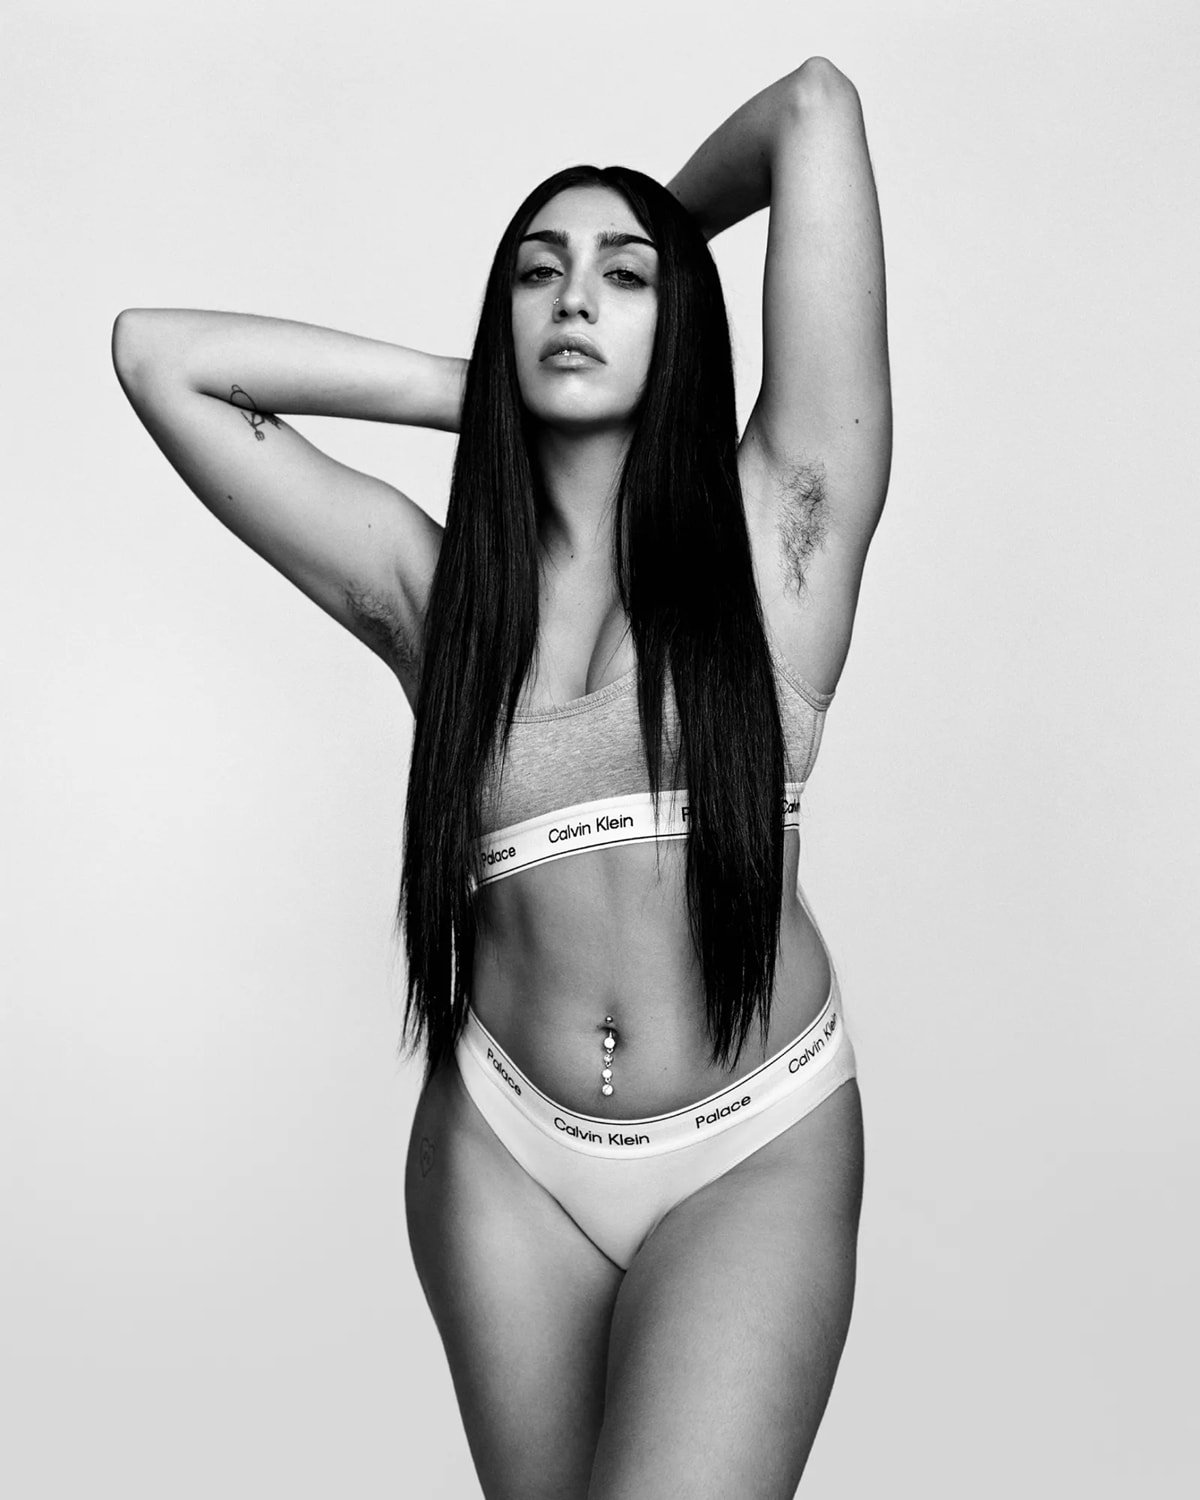 Lourdes Leon models in Calvin Klein's CK1 Palace campaign celebrating self-expression, inclusivity, and body hair